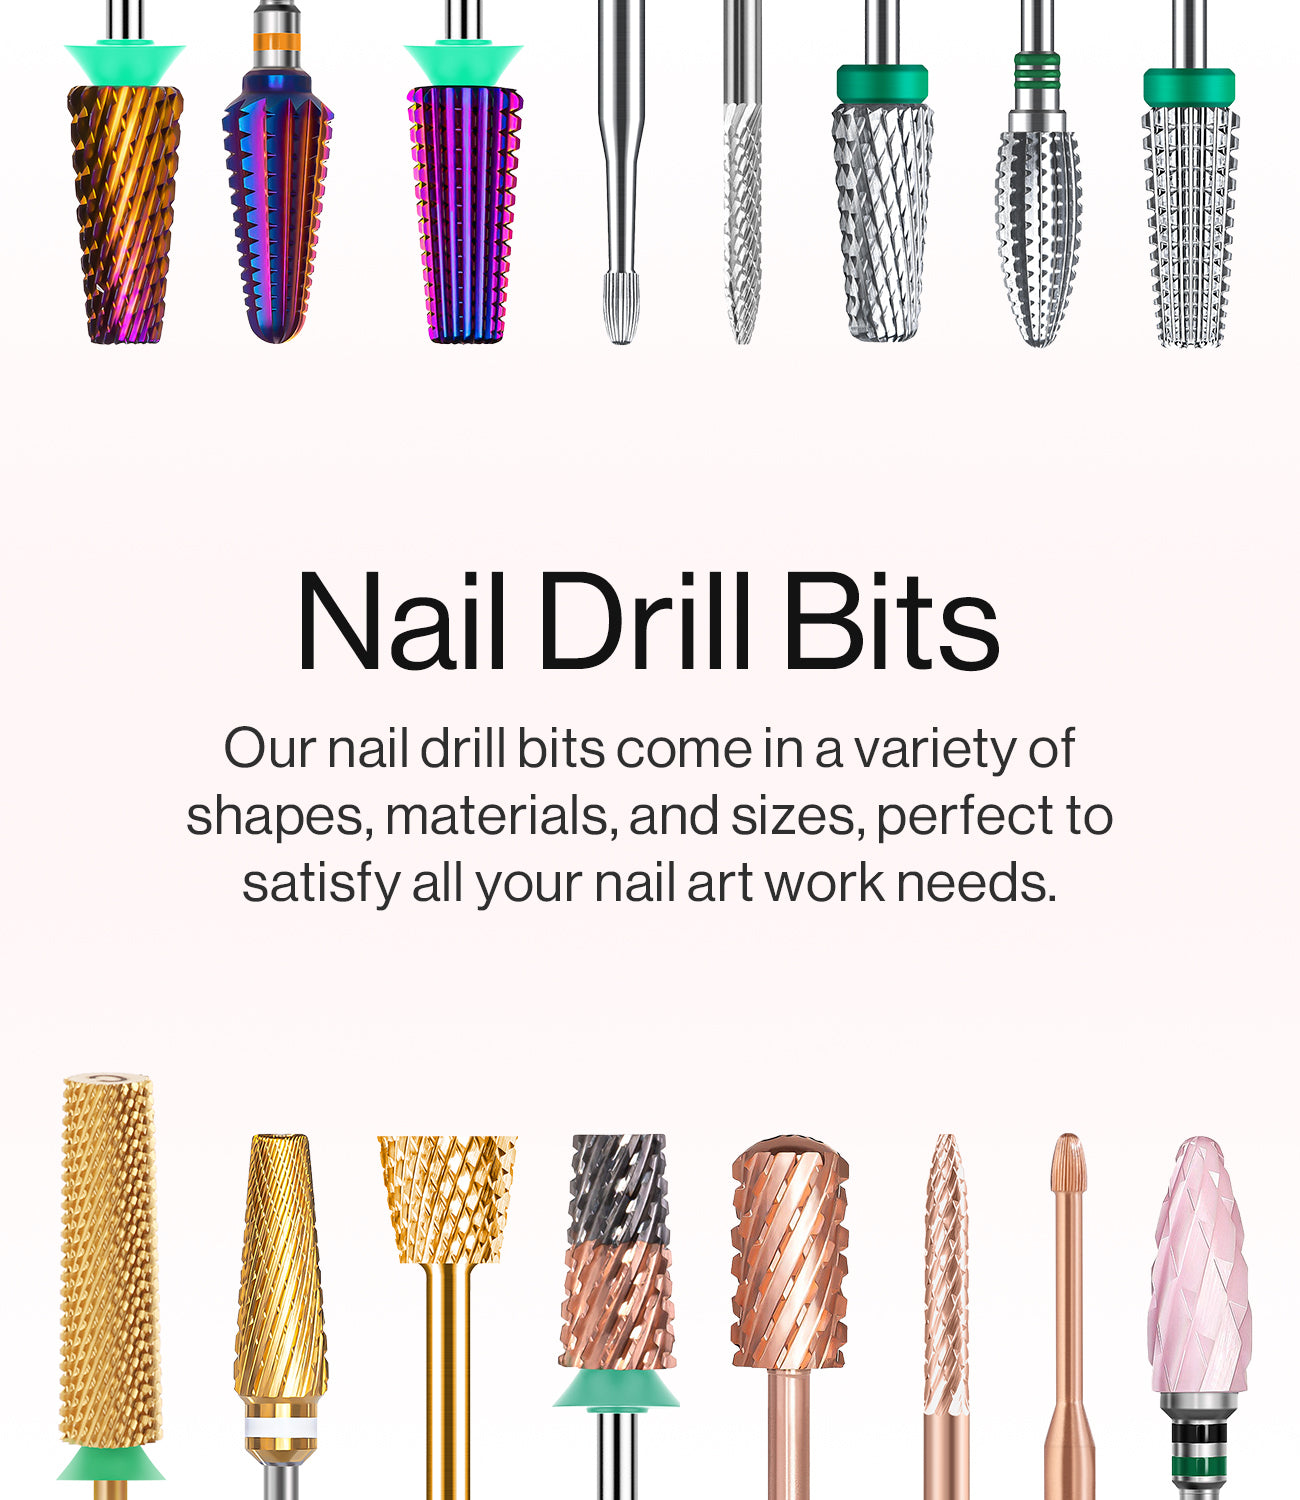 Diamond Nail Drill Bits 2.1mm Fine Nail Drill File Bits for Acrylic Gel  Nails Cuticle Manicure Pedicure RDR22 | KHDA Approved Academy ≡ Nail Care ⋅  Eye Care ⋅ Skin Care ⋅ Hair Care